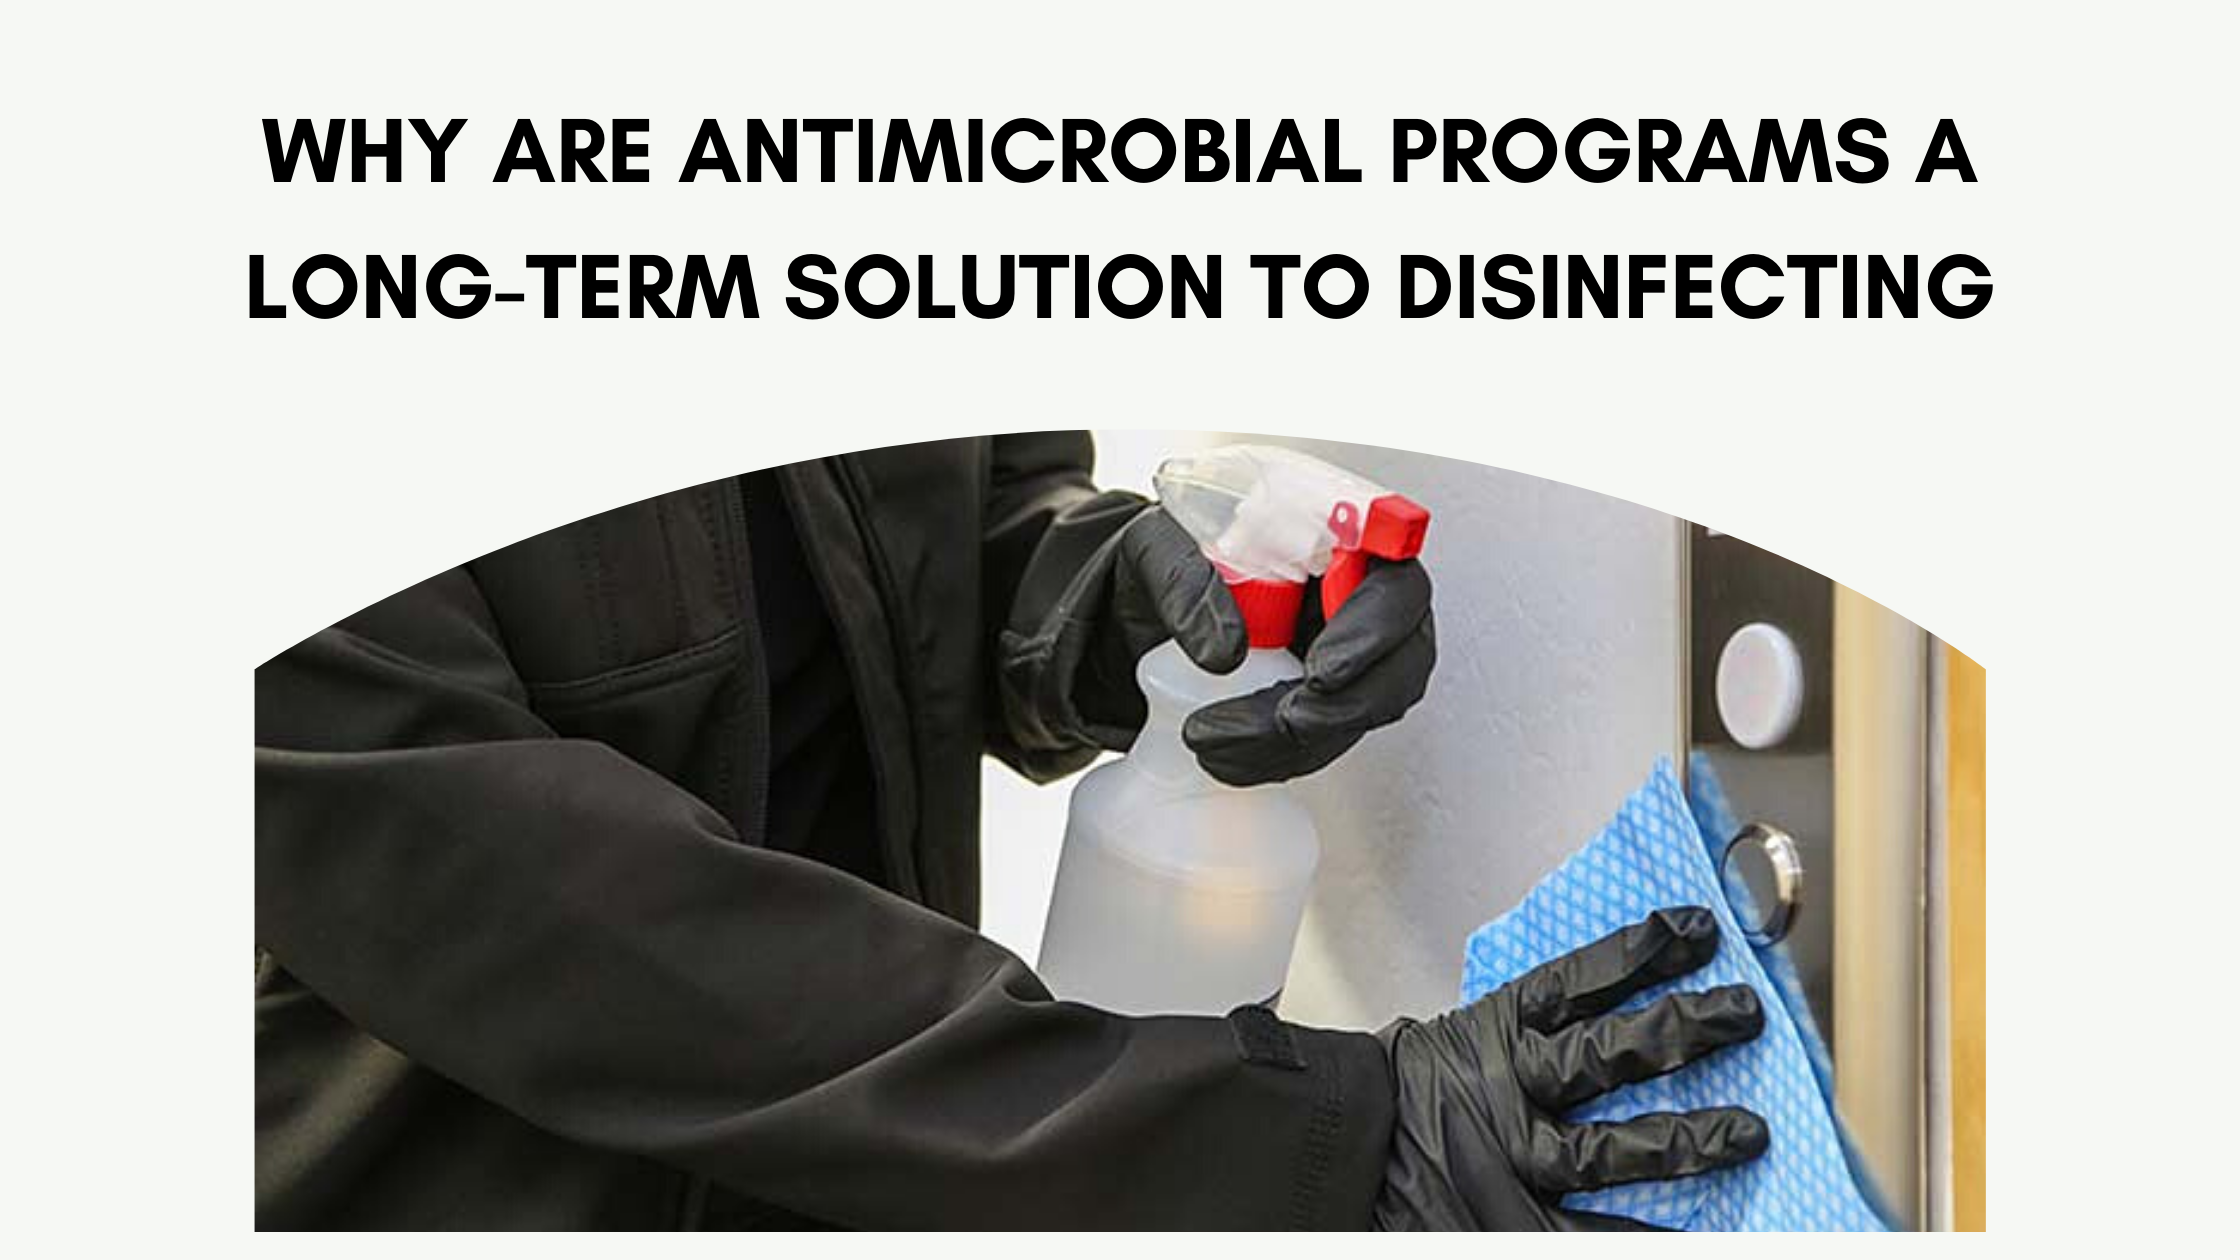 Why Are Antimicrobial Programs a Long-Term Solution to Disinfecting?